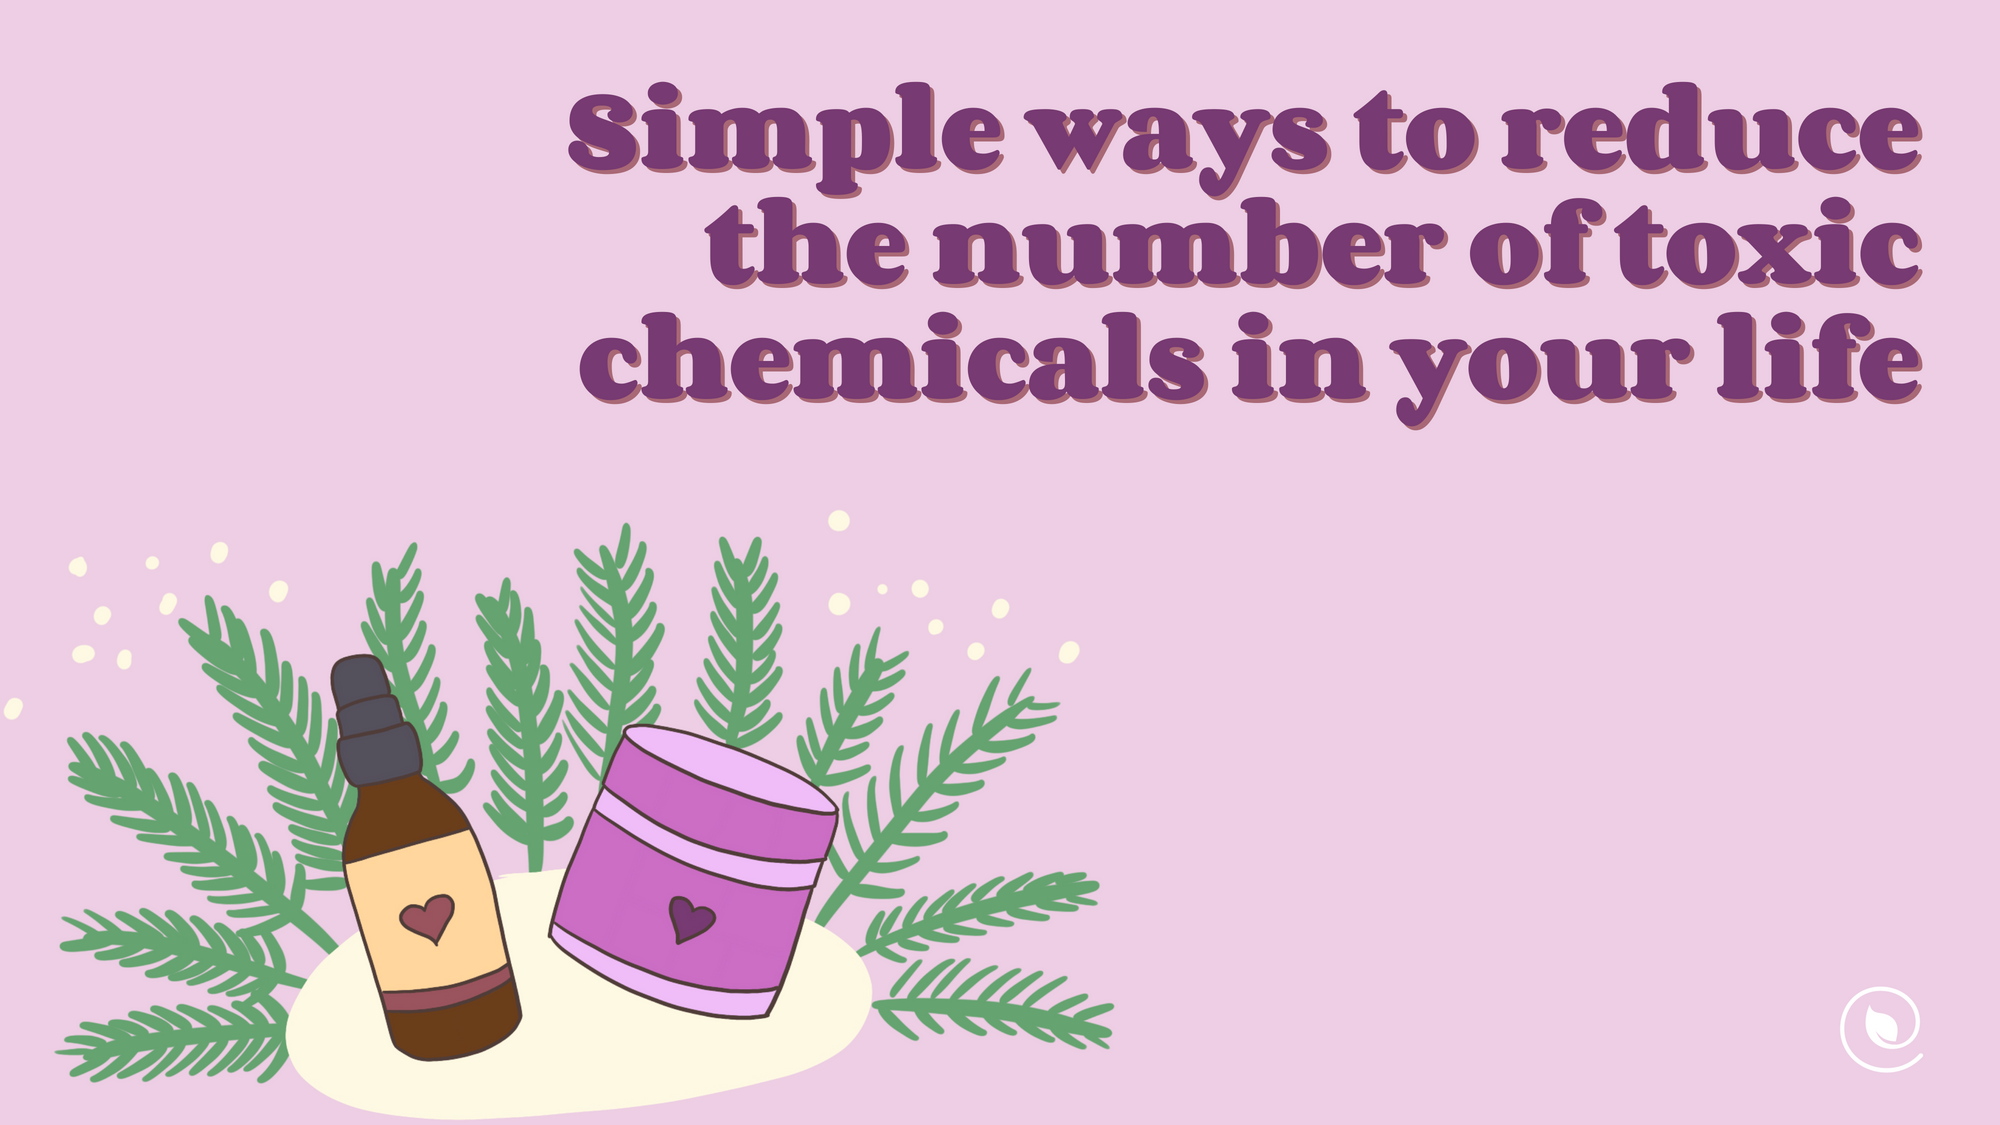 Simple Ways to Reduce the Number of Toxic Chemicals in Your Life